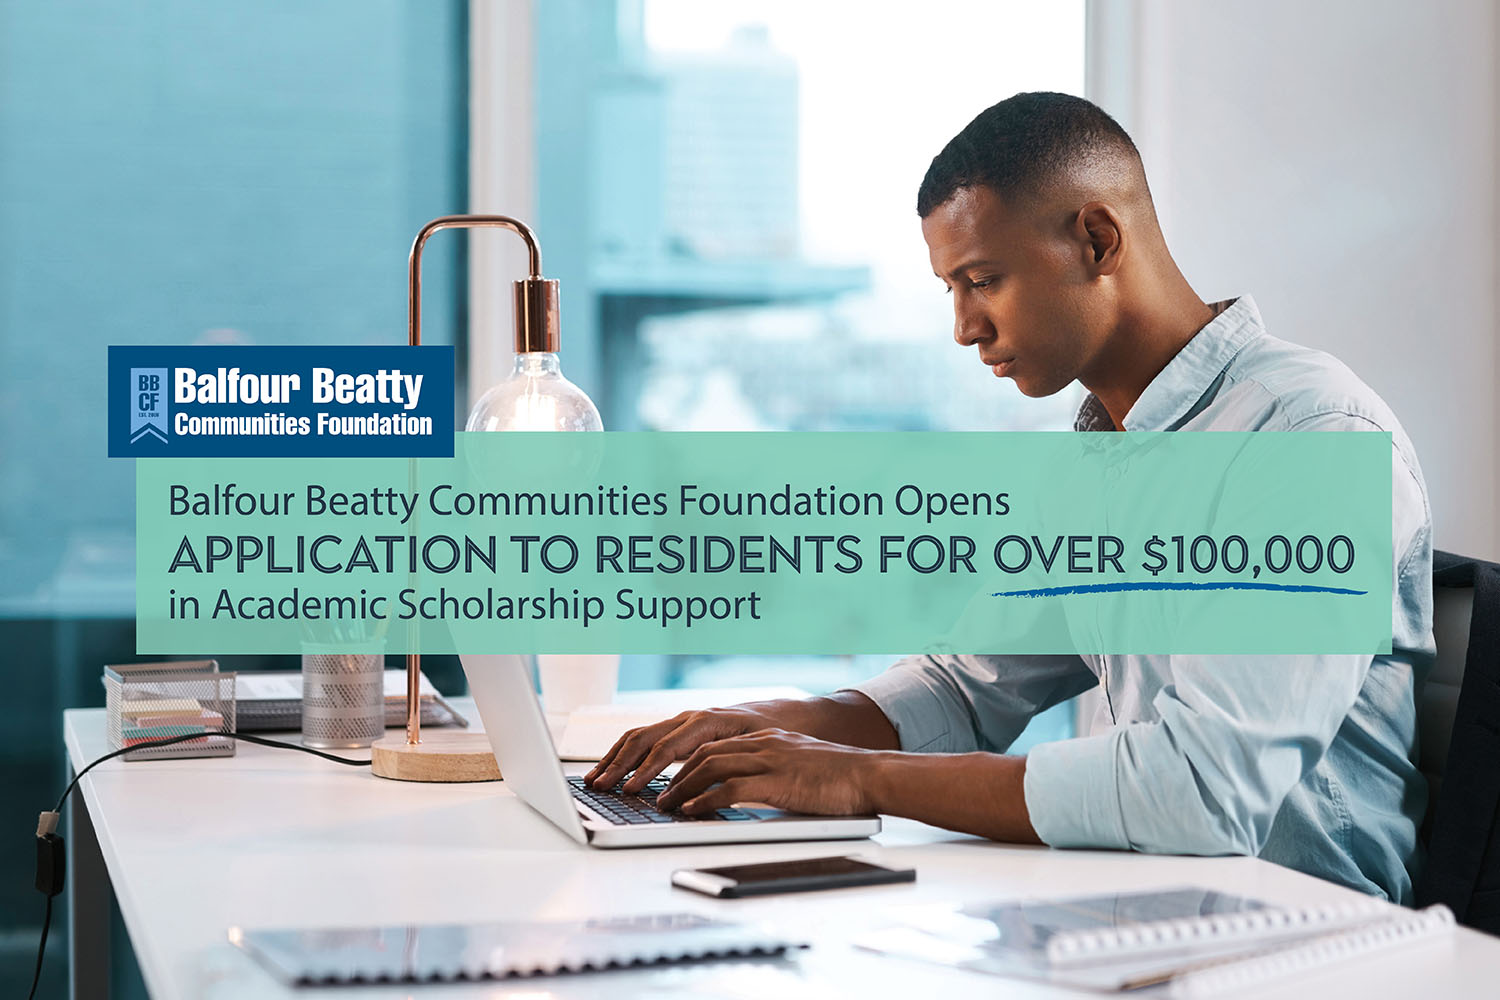 Balfour Beatty Communities Foundation Invites Residents to Apply for 2023/2024 Academic Scholarship Support